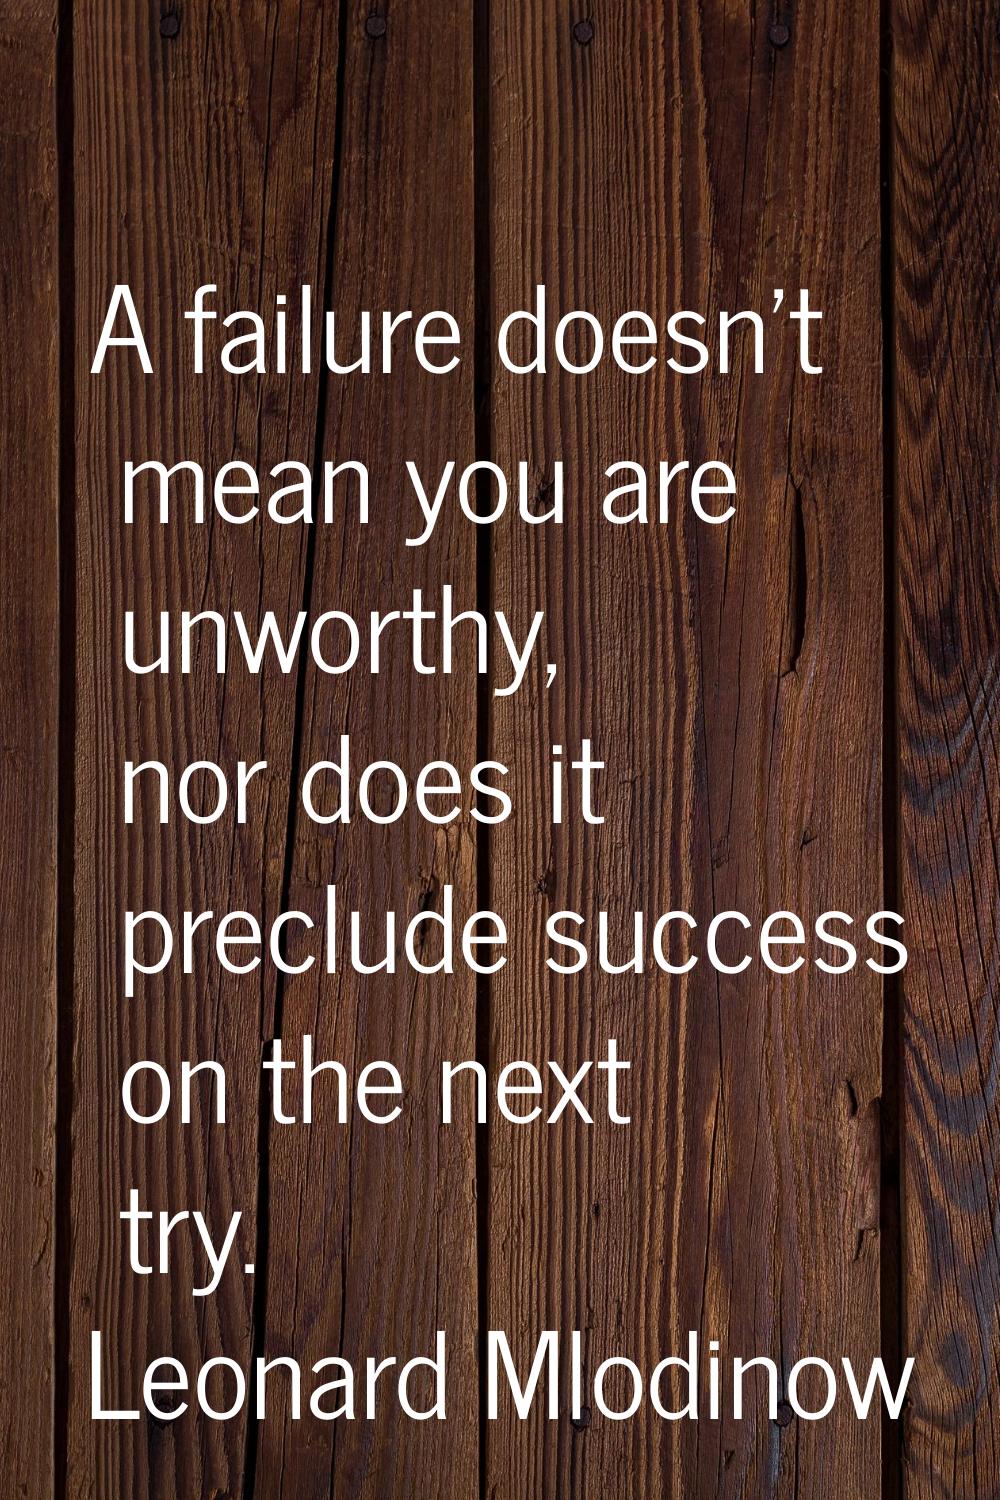 A failure doesn't mean you are unworthy, nor does it preclude success on the next try.